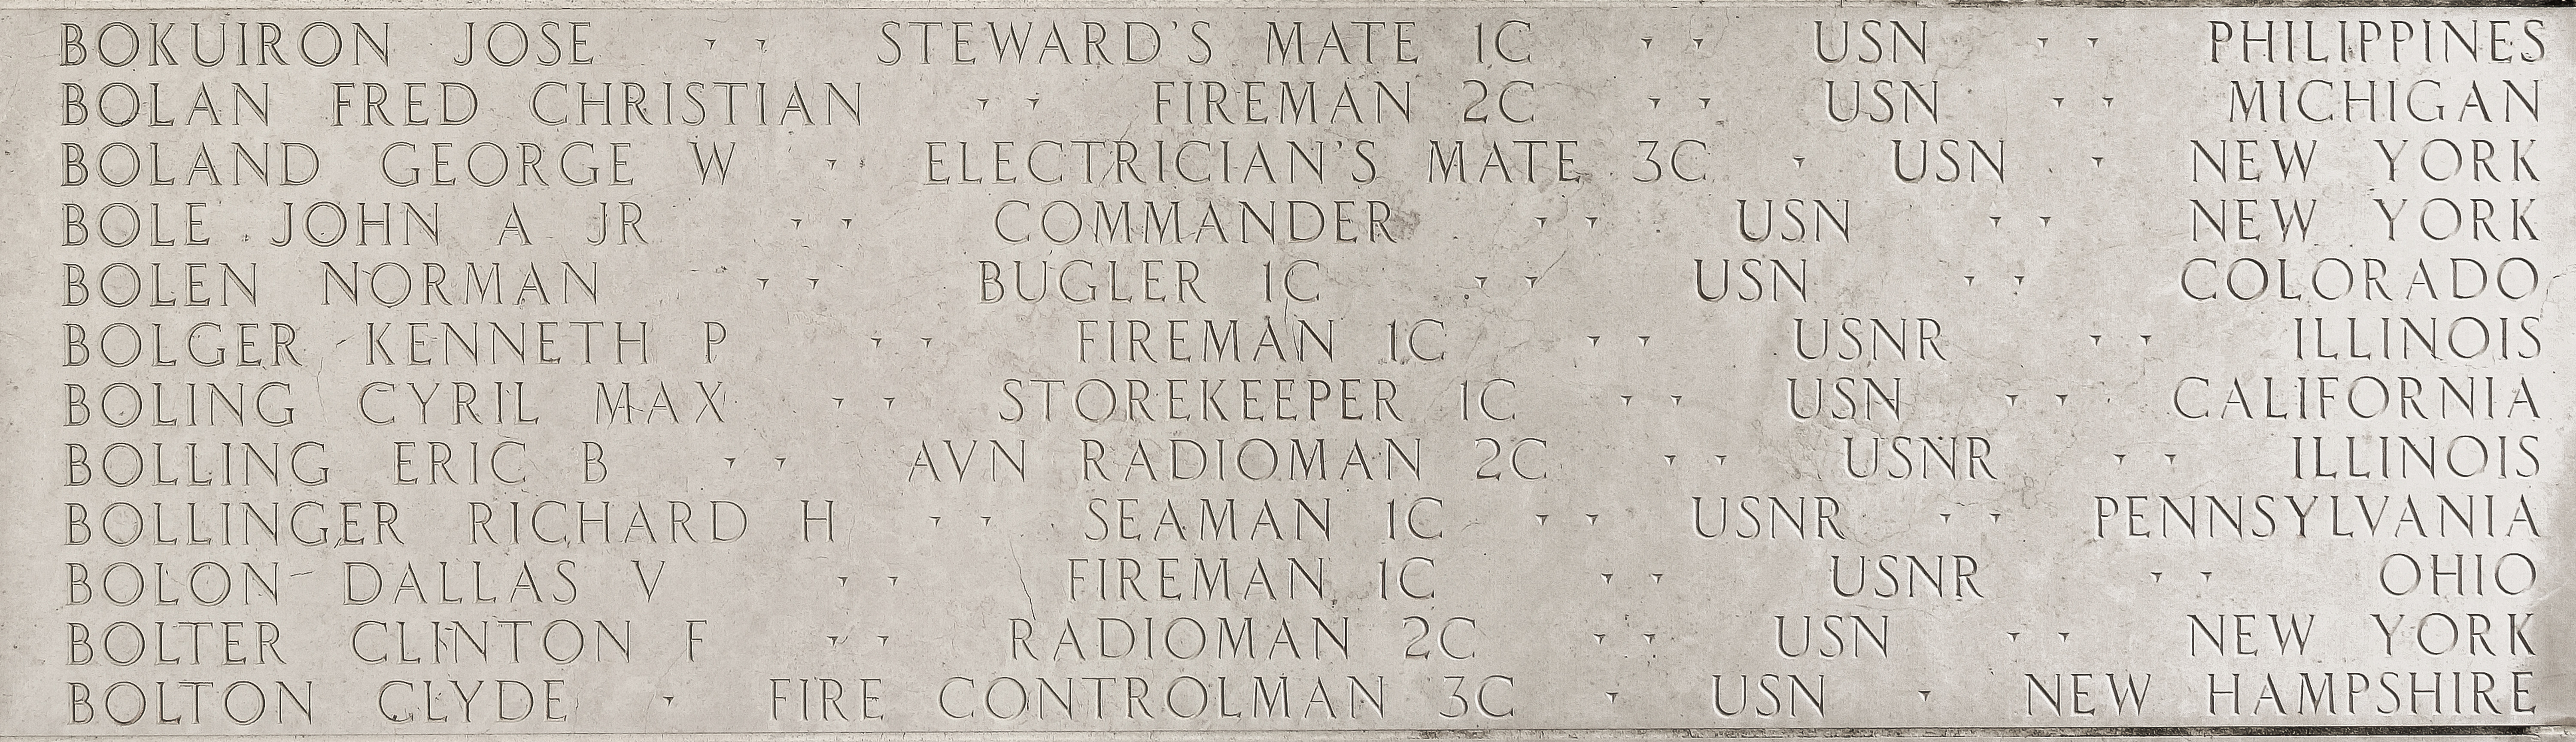 George W. Boland, Electrician's Mate Third Class